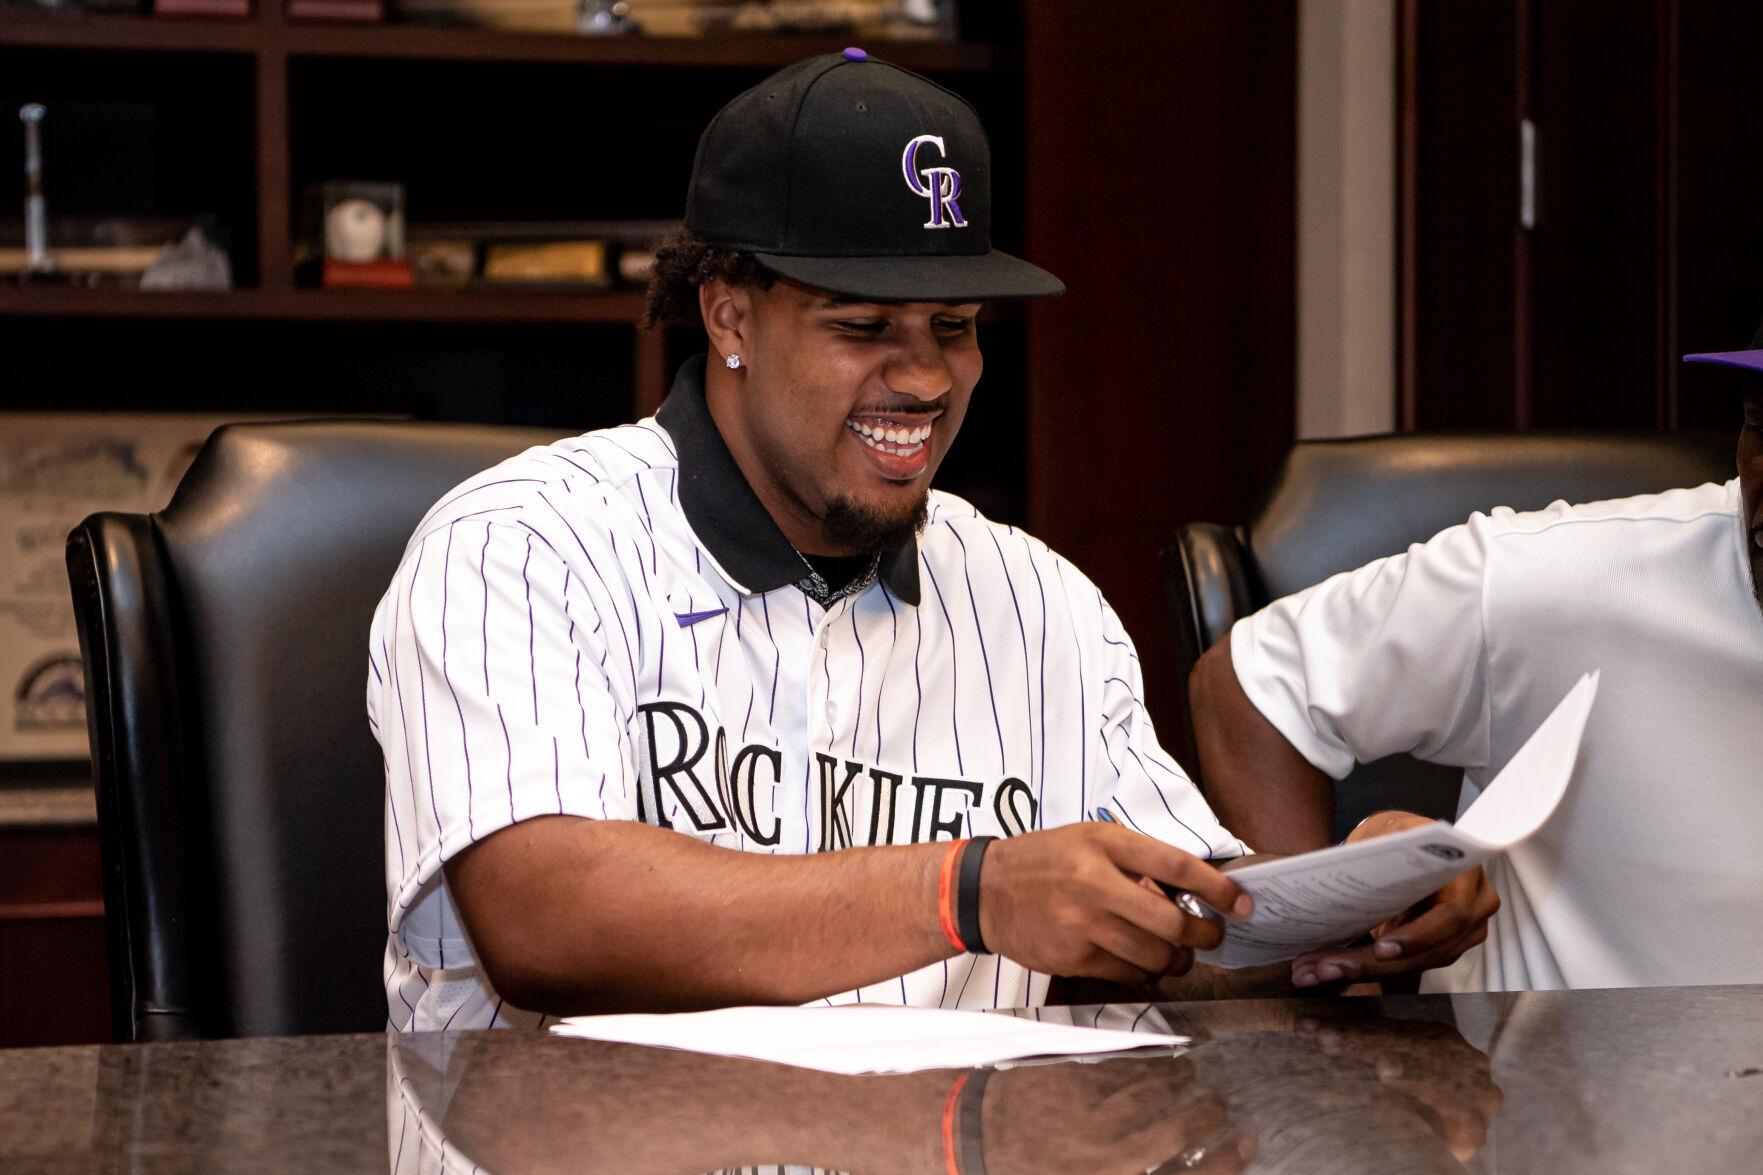 Rockies sign all but one draft pick as players prepare to start careers